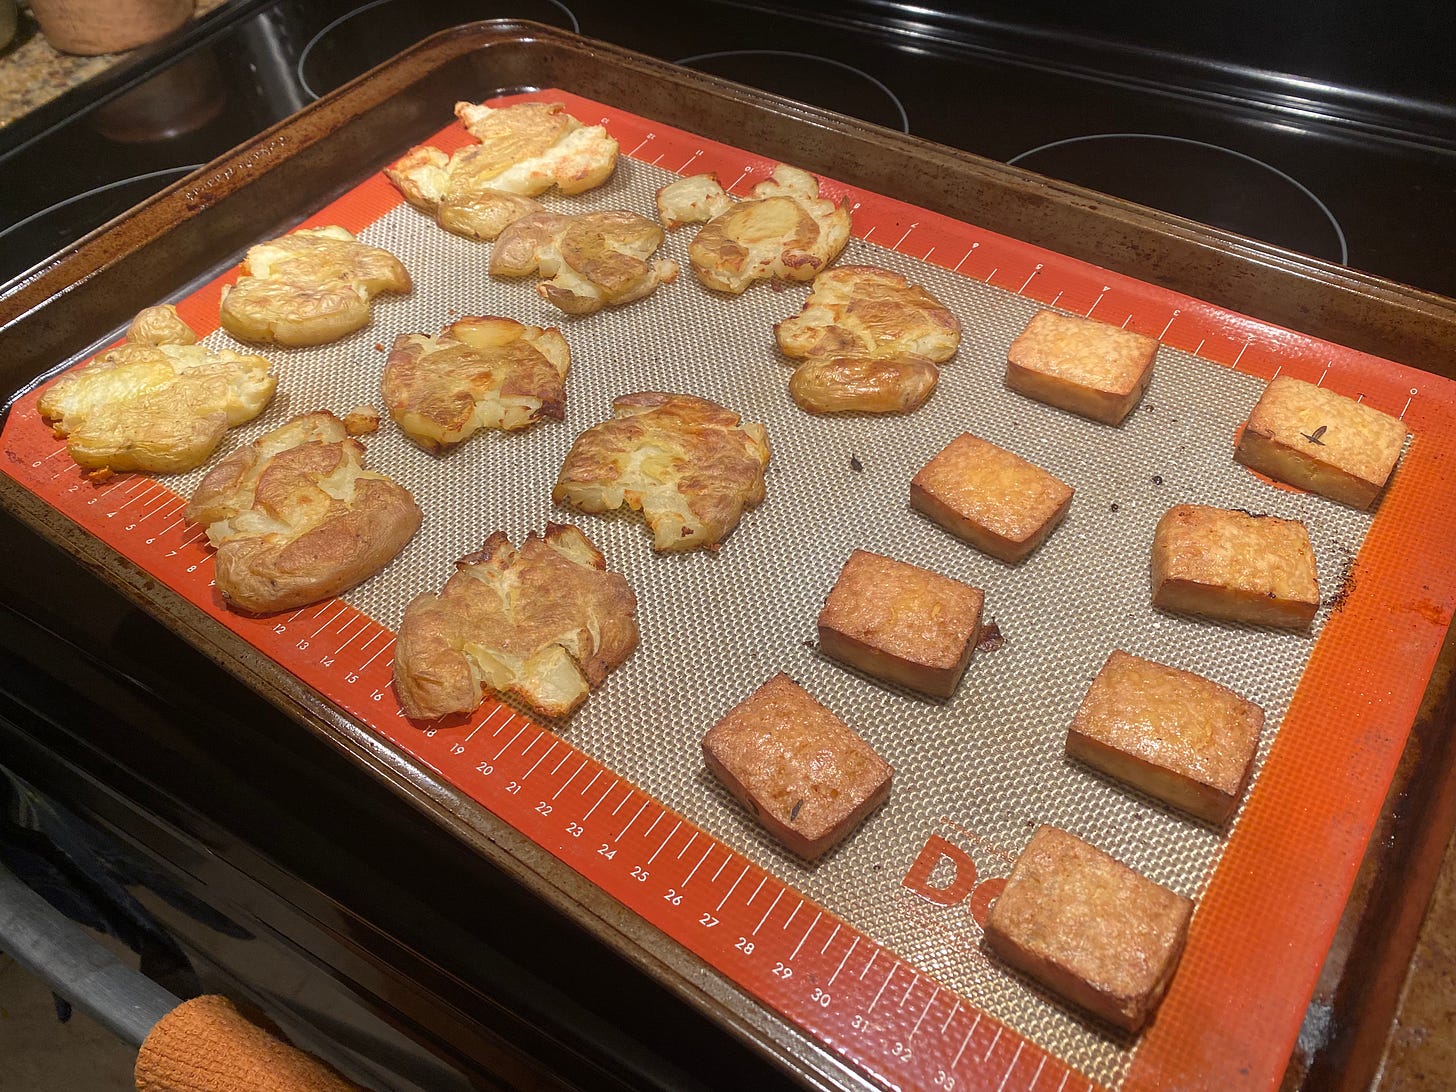 A baking sheet lined with a silpat. On the left are some smashed potatoes, skins split, edges and tops lightly browned. On the right are squares of marinated tofu, stained dark from the marinade and browned in the oven.